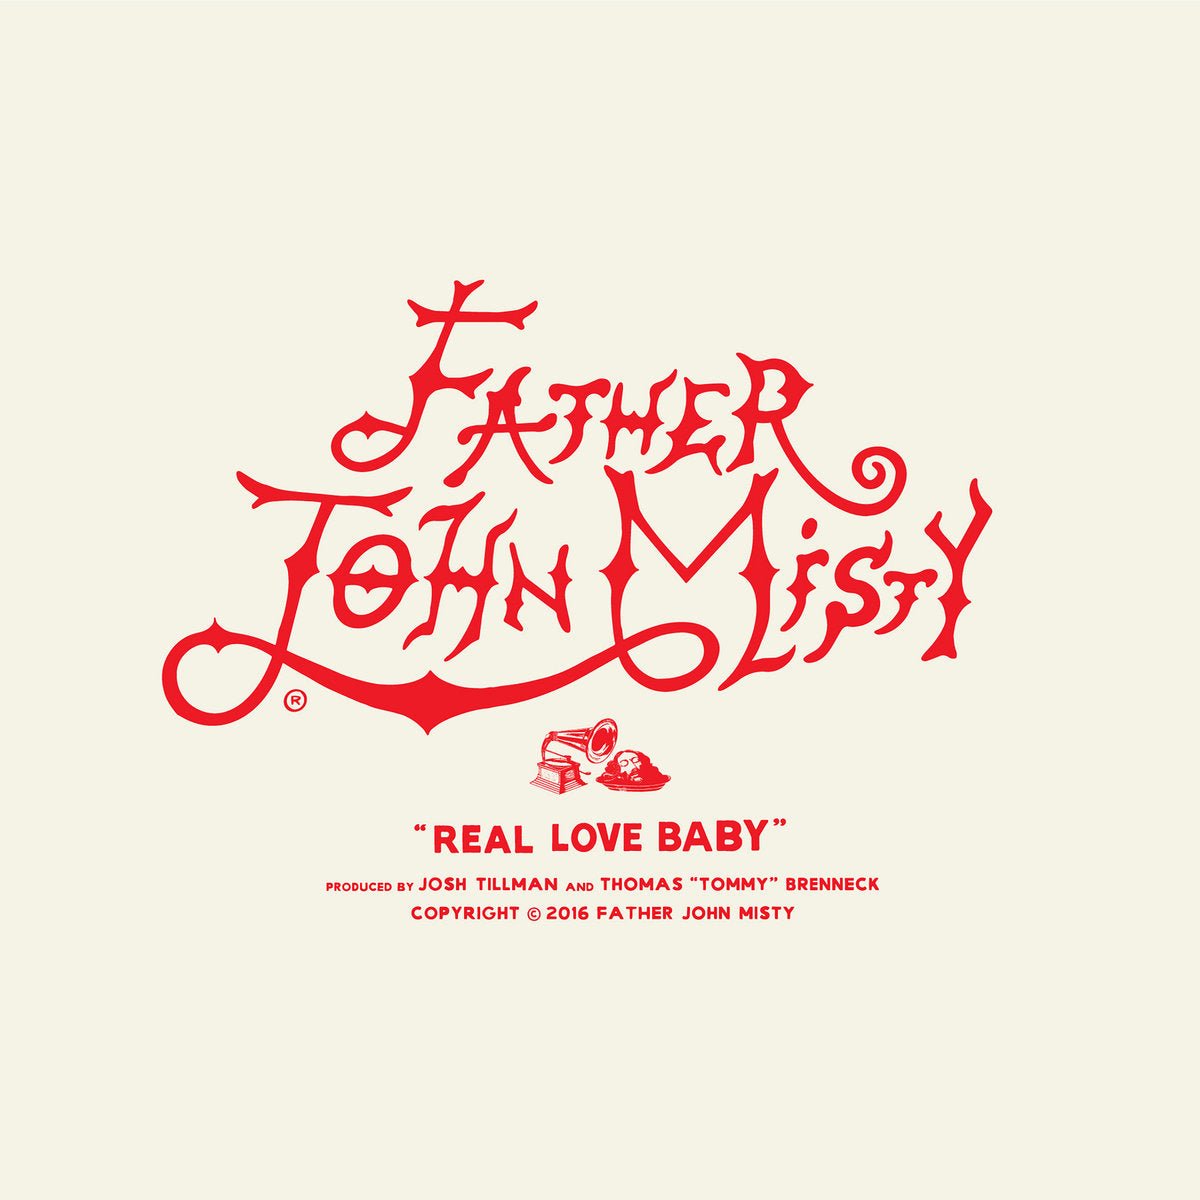 Father John Misty "Real Love Baby" 7"